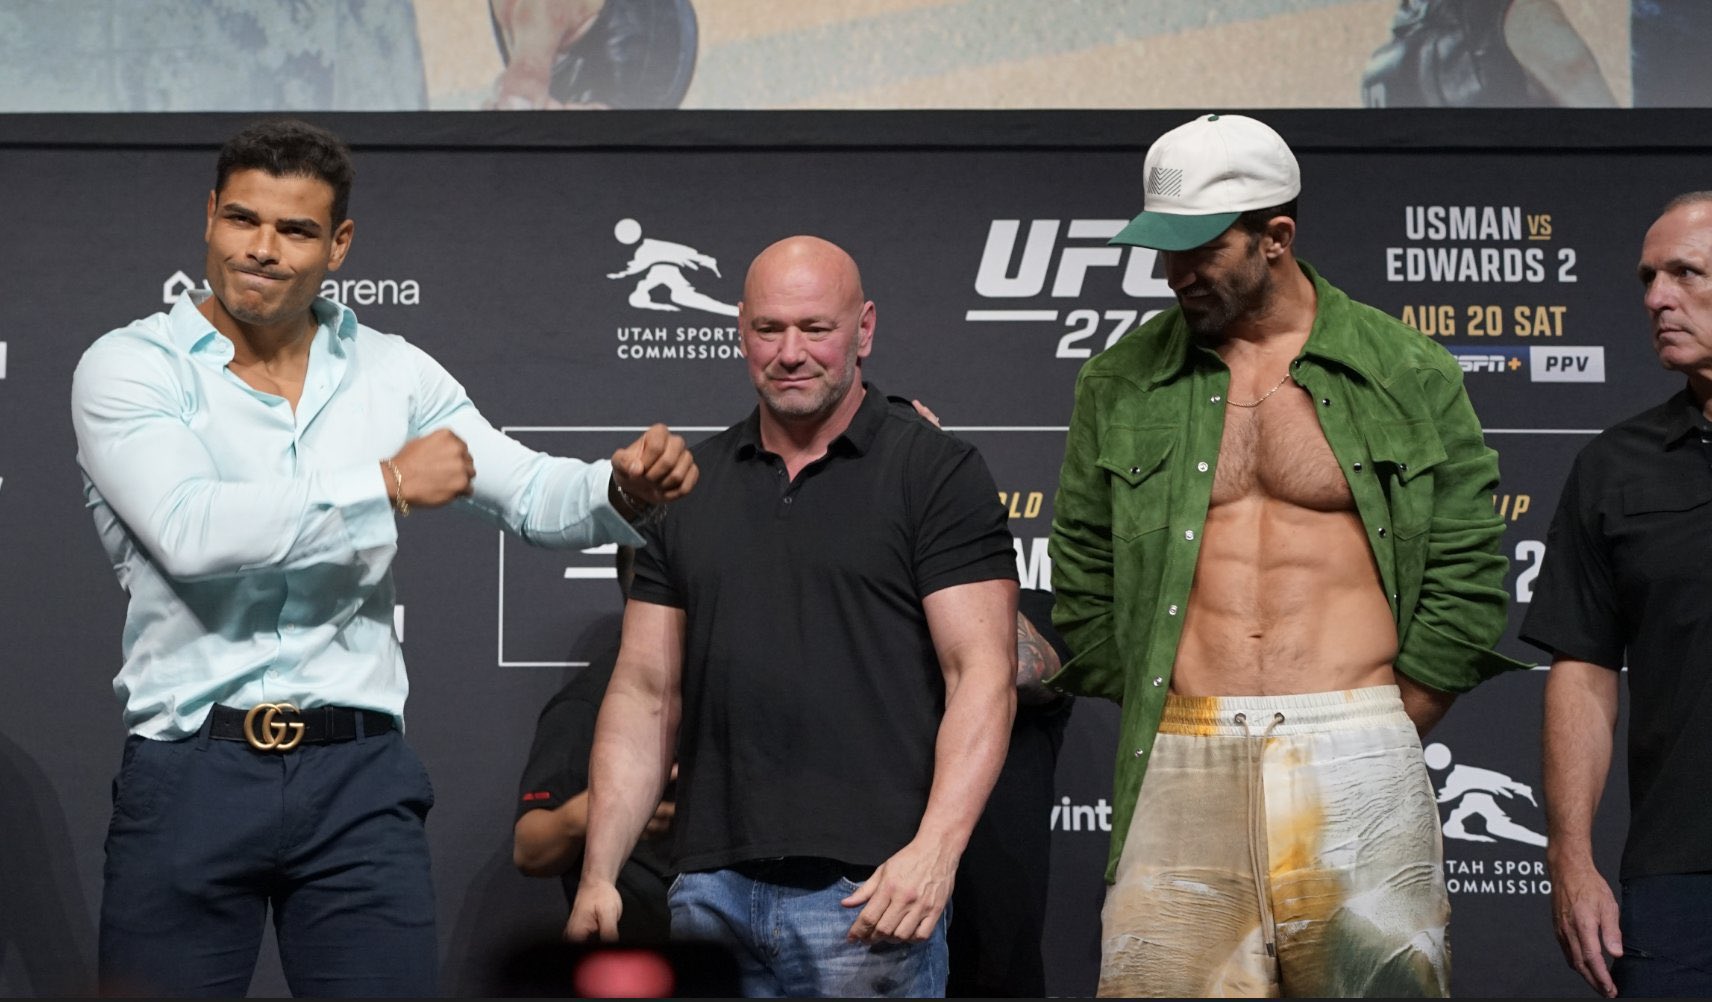 UFC 278 Press Conference: Check out HEATED UFC Press Conference as Paulo Costa and Luke Rockhold almost land up in fist fight before Dana White and security calm things down: Watch Video